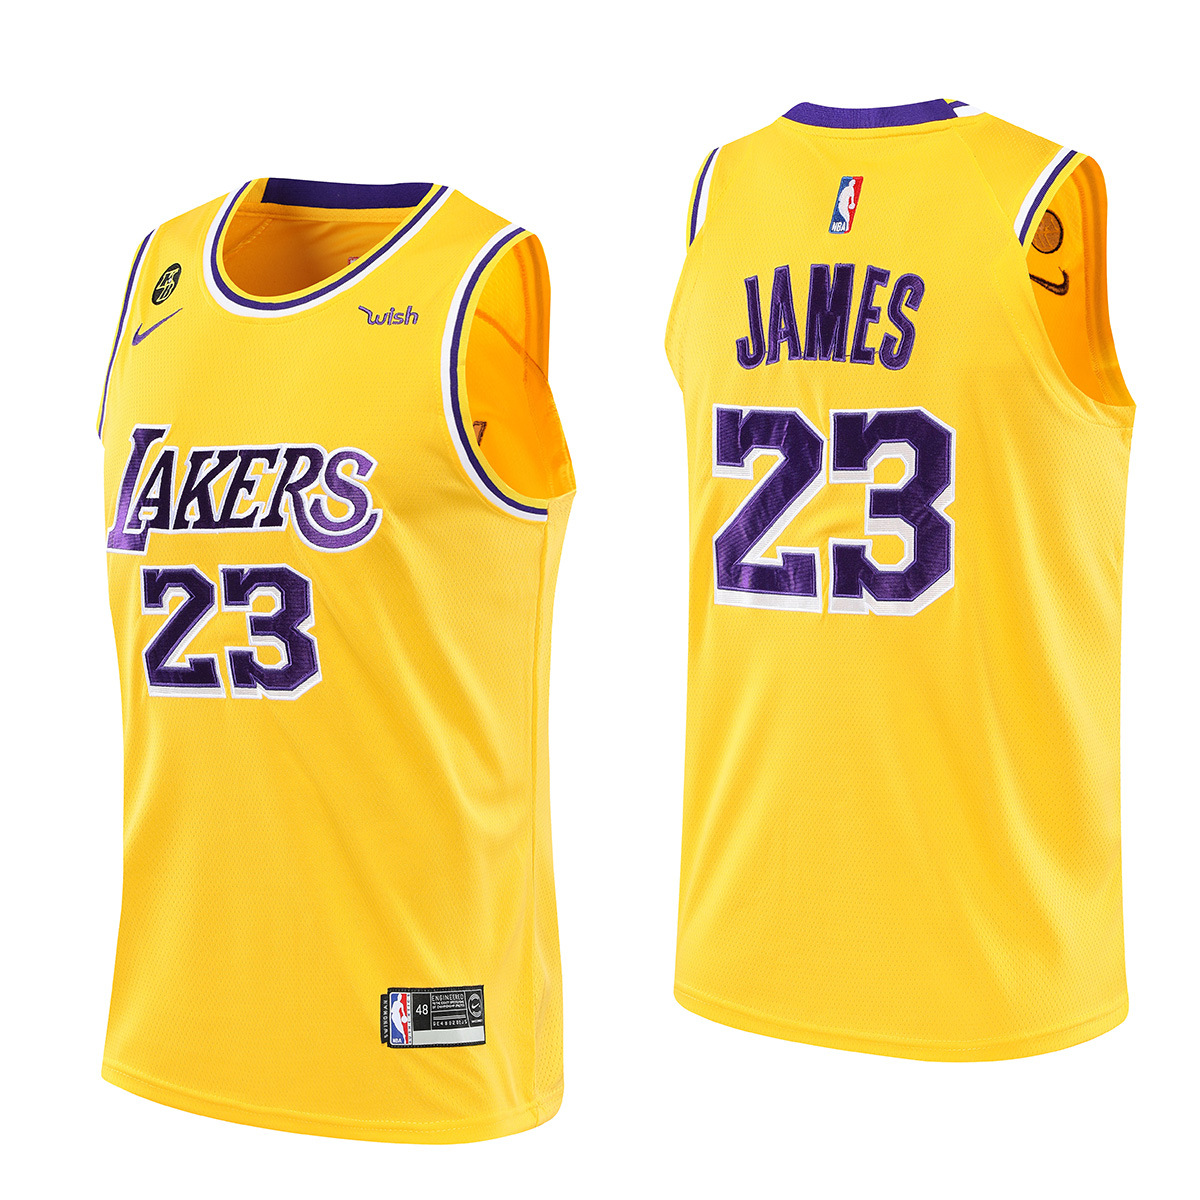 LeBron James 23 Los Angeles Lakers Jersey yellow S-XXLStar embroidery 